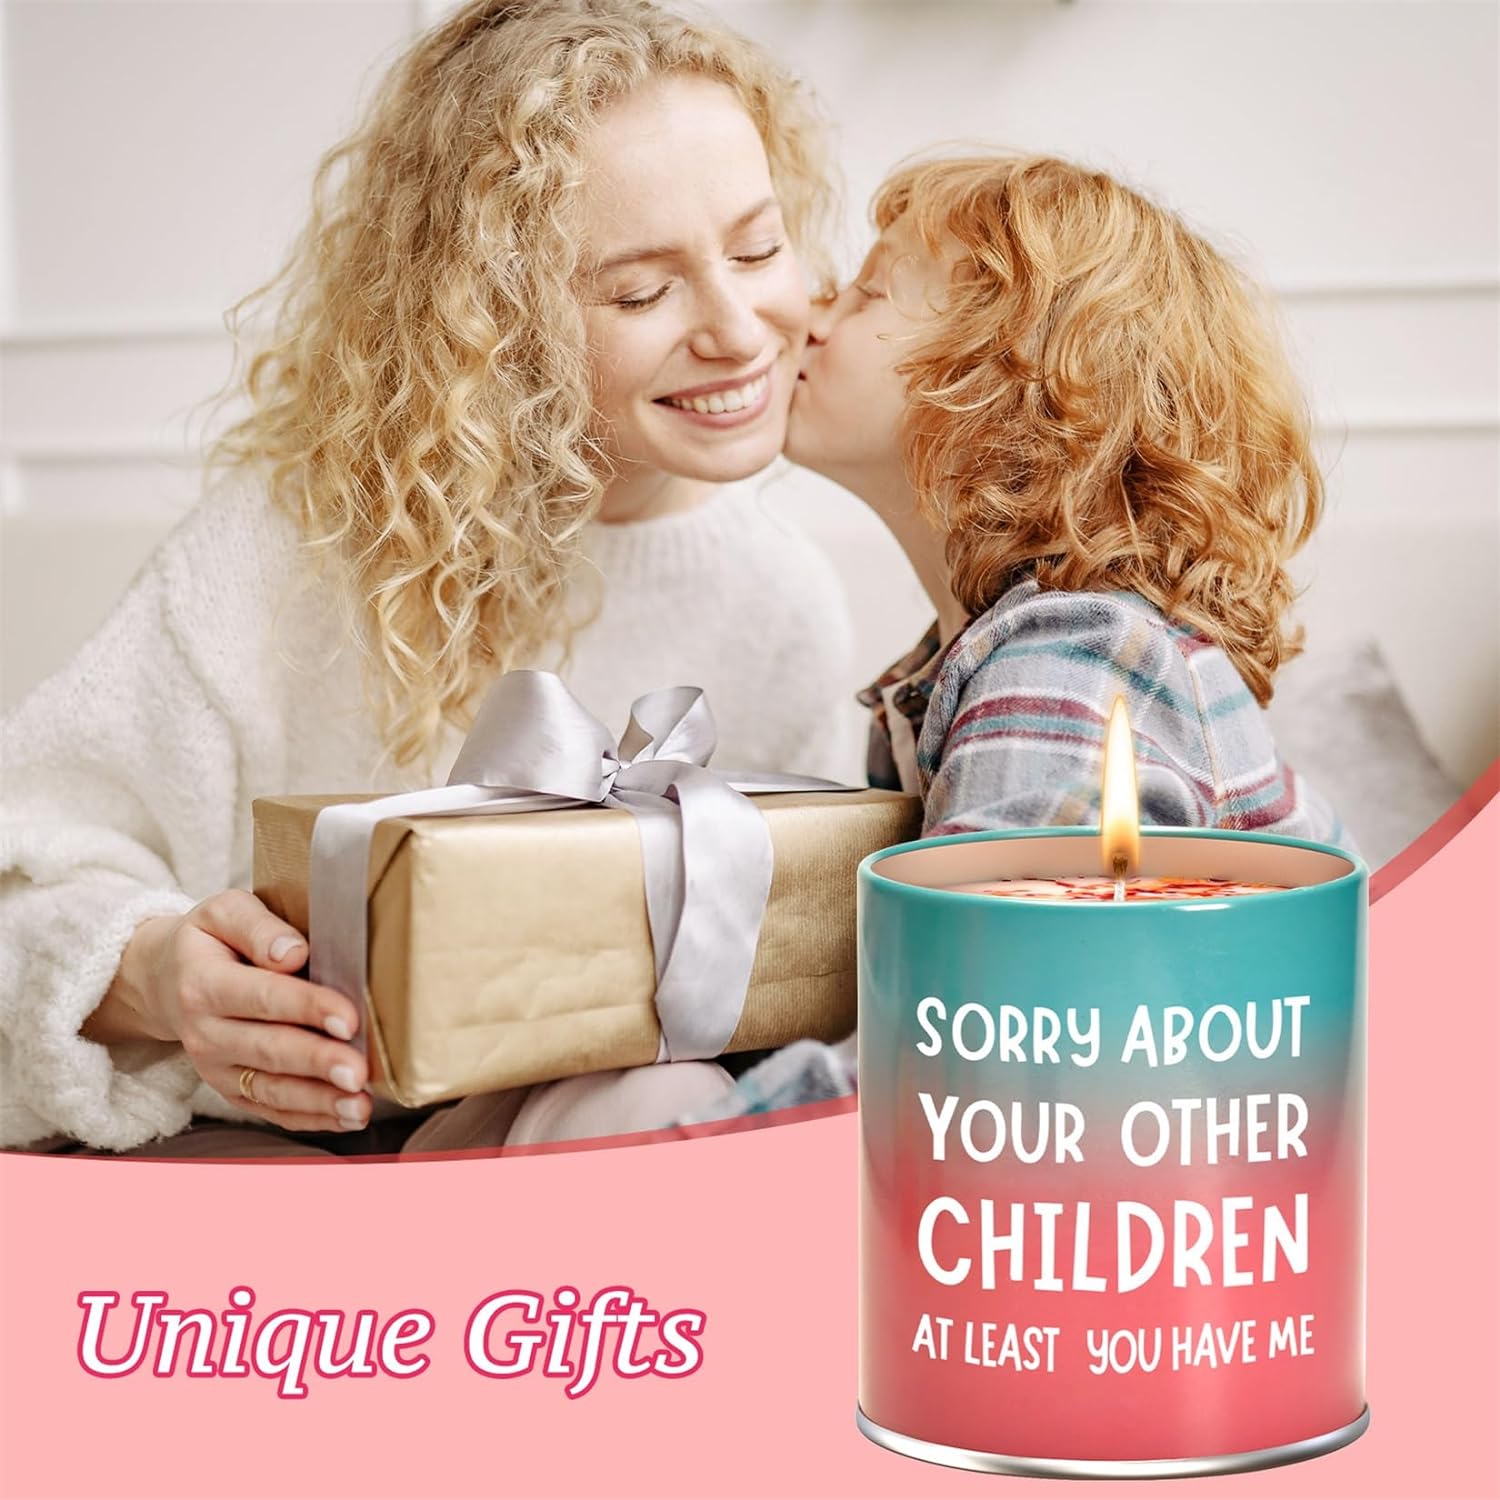 Mothers Day Gifts for Mom,Gifts from Daughter Son Kids, Gifts for Mom-,Funny Gifts Ideas for Mom-Scented Candles